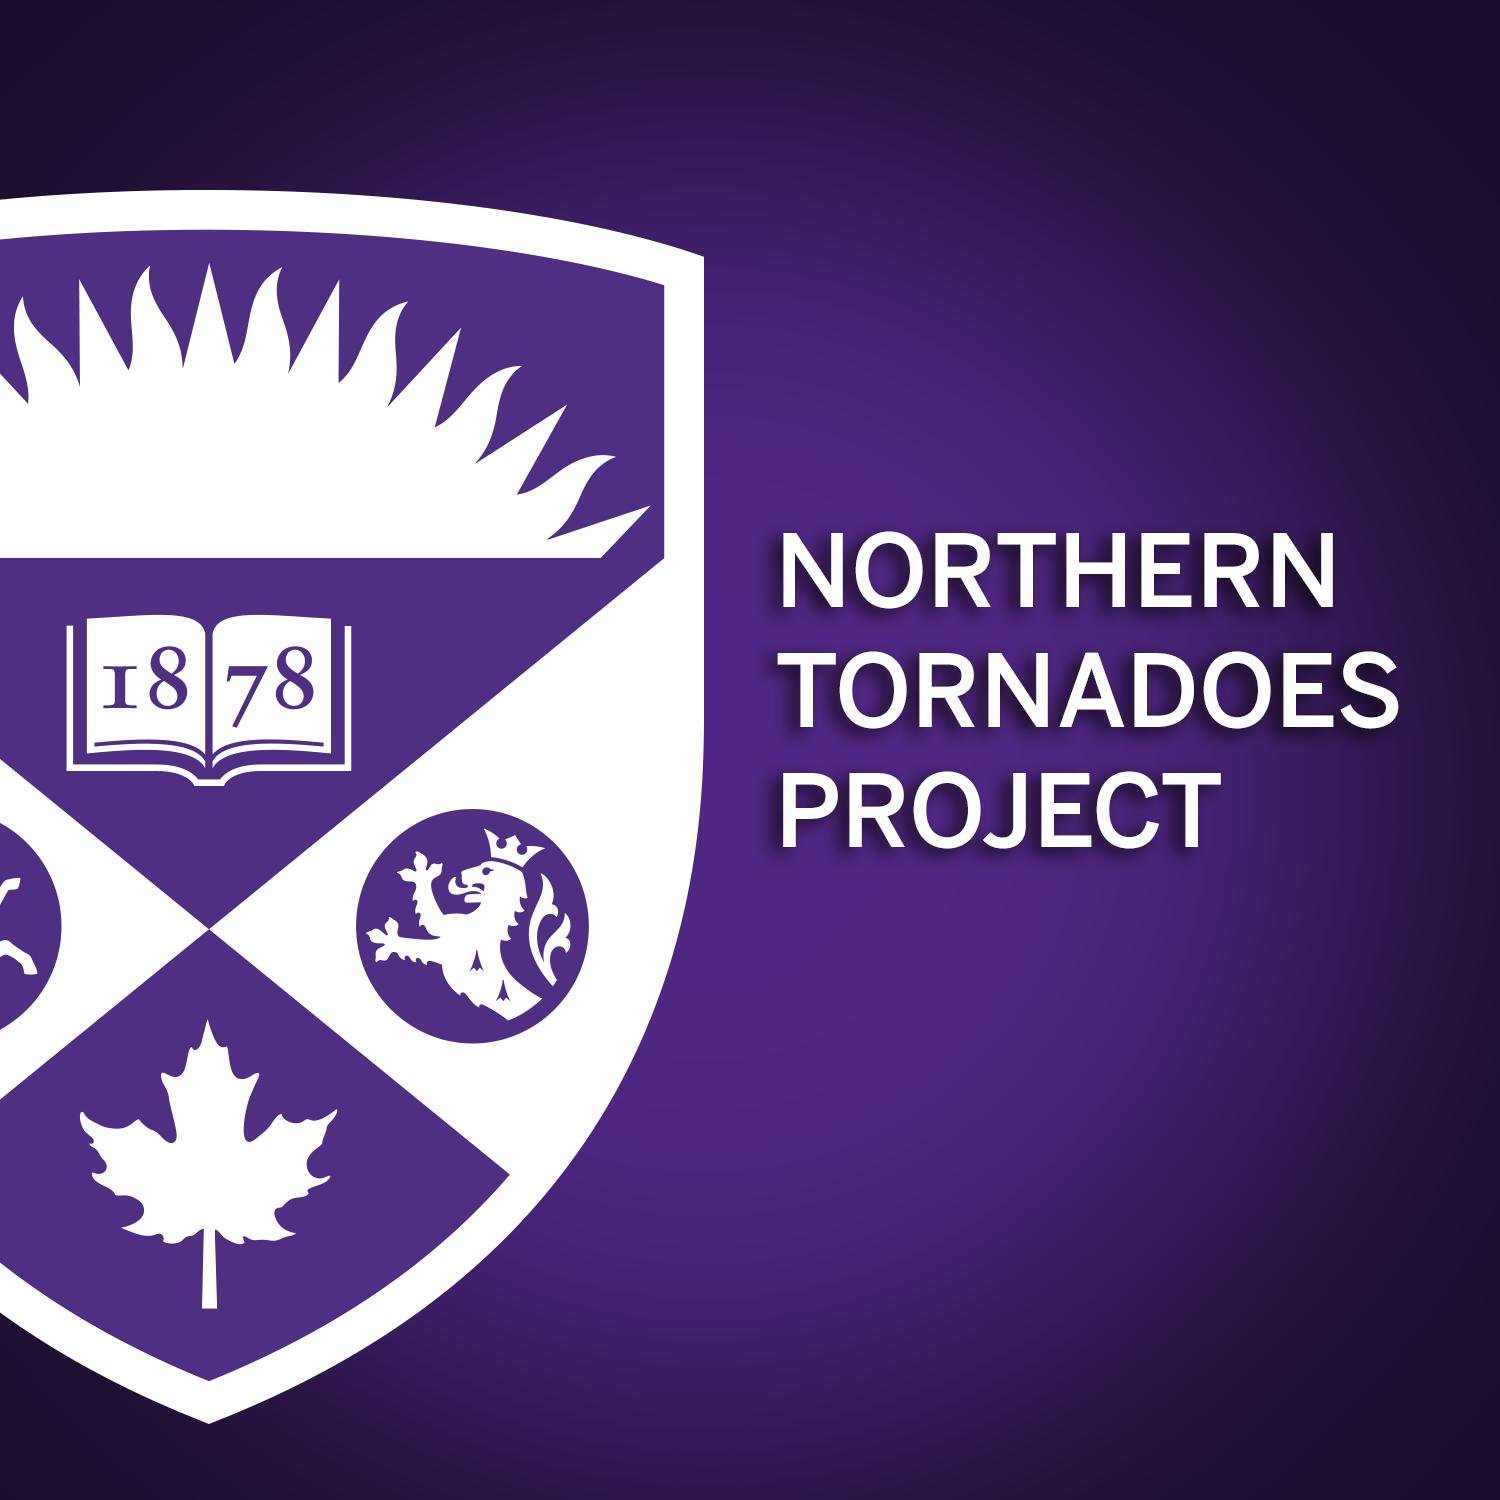 Founded in 2017 by Western University with ImpactWX, NTP aims to detect and document all tornadoes in Canada and uncover Canada’s true tornado climatology.